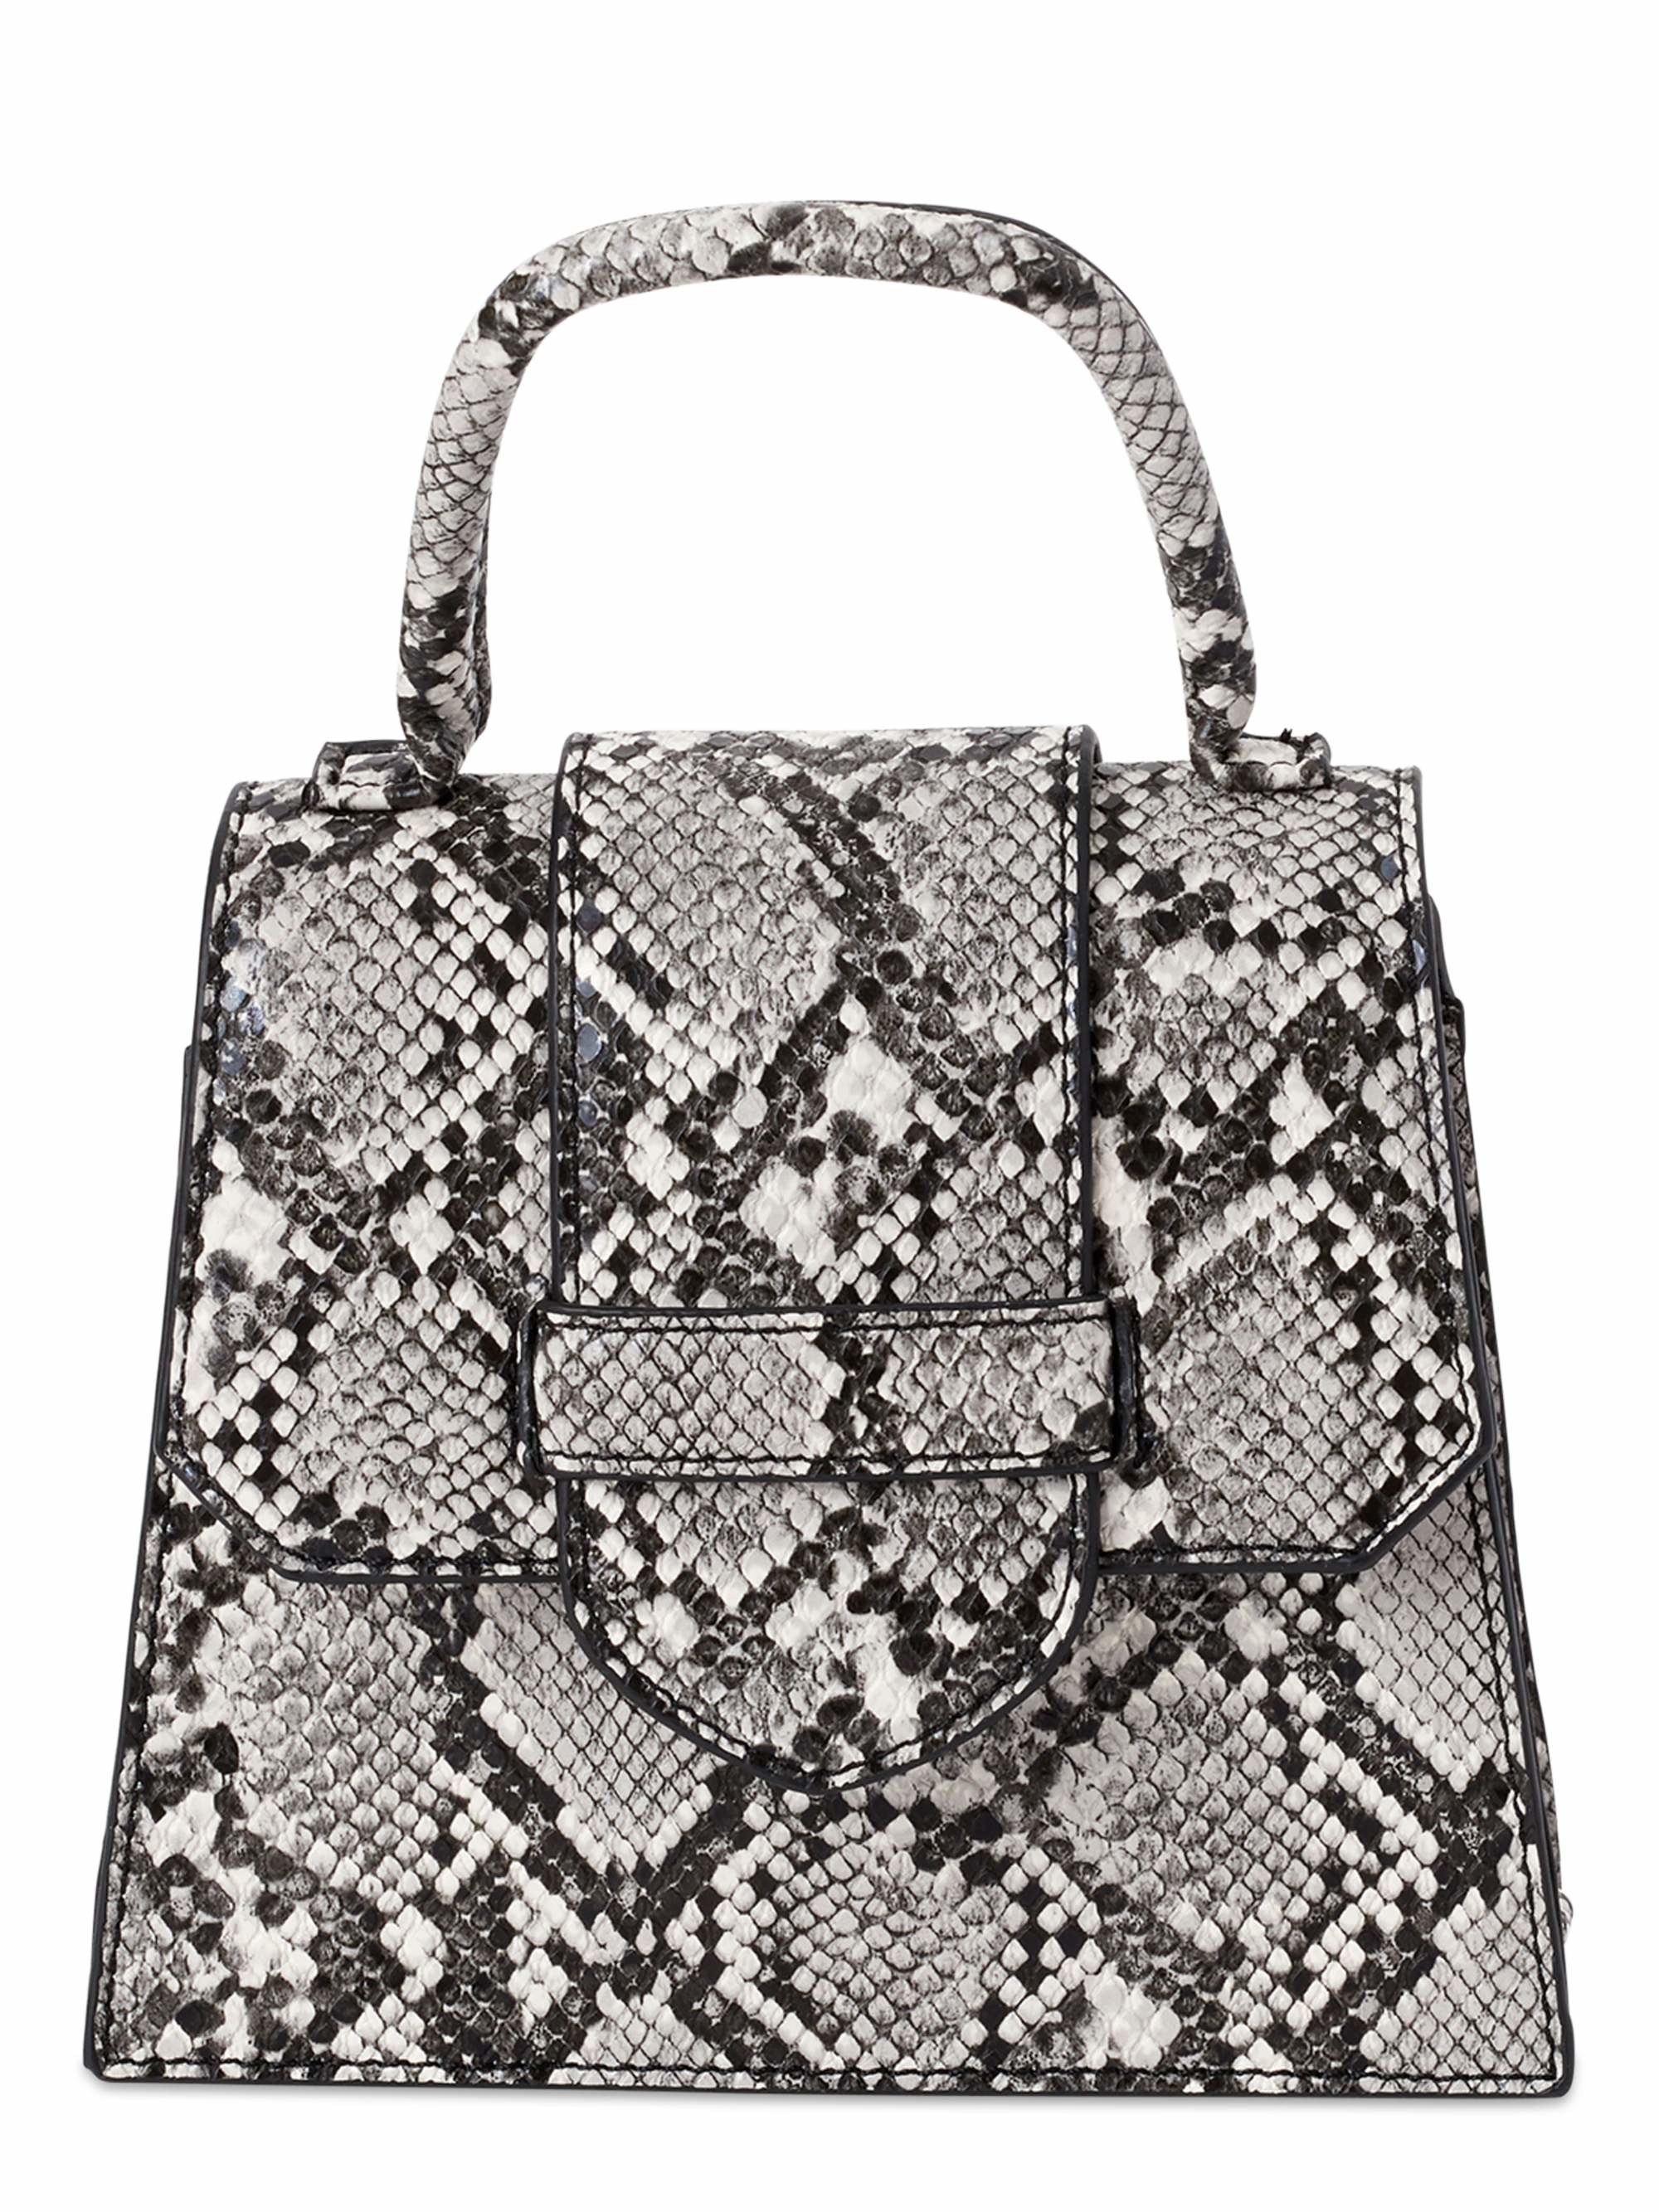 Small faux leather snake pattern bag.